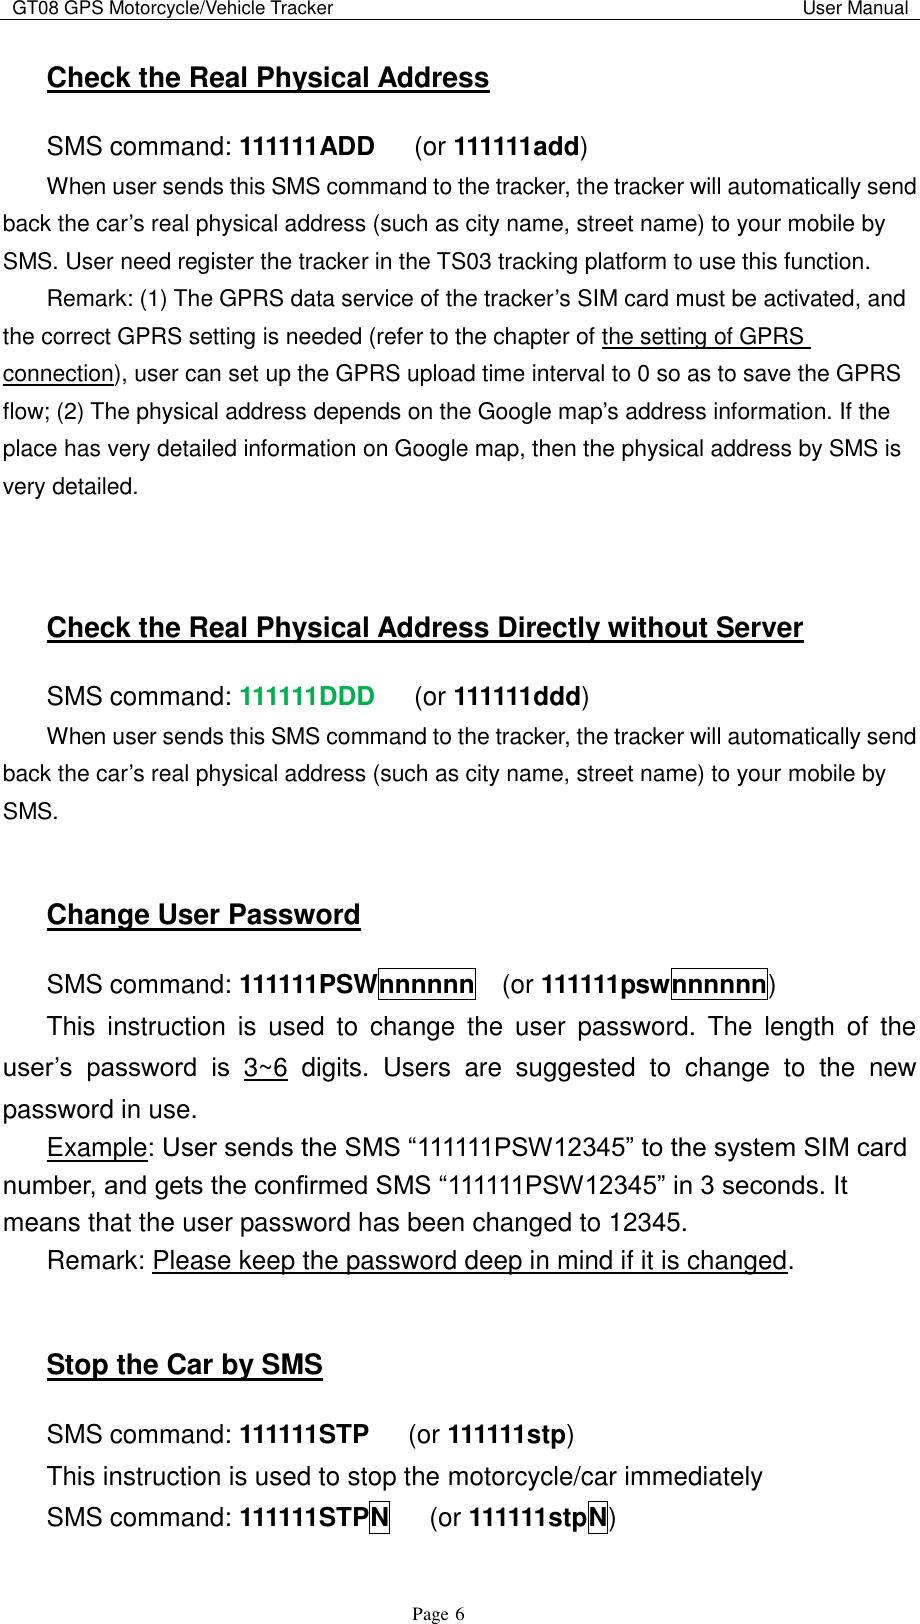 GT08 GPS Motorcycle/Vehicle Tracker                                                                                           User Manual                                     Page   6 Check the Real Physical Address SMS command: 111111ADD    (or 111111add) When user sends this SMS command to the tracker, the tracker will automatically send back the car‟s real physical address (such as city name, street name) to your mobile by SMS. User need register the tracker in the TS03 tracking platform to use this function. Remark: (1) The GPRS data service of the tracker‟s SIM card must be activated, and the correct GPRS setting is needed (refer to the chapter of the setting of GPRS connection), user can set up the GPRS upload time interval to 0 so as to save the GPRS flow; (2) The physical address depends on the Google map‟s address information. If the place has very detailed information on Google map, then the physical address by SMS is very detailed.   Check the Real Physical Address Directly without Server SMS command: 111111DDD    (or 111111ddd) When user sends this SMS command to the tracker, the tracker will automatically send back the car‟s real physical address (such as city name, street name) to your mobile by SMS.  Change User Password SMS command: 111111PSWnnnnnn  (or 111111pswnnnnnn) This  instruction  is  used  to  change  the  user  password.  The length  of  the user‟s  password  is  3~6  digits.  Users  are  suggested  to  change  to  the  new password in use. Example: User sends the SMS “111111PSW12345” to the system SIM card number, and gets the confirmed SMS “111111PSW12345” in 3 seconds. It means that the user password has been changed to 12345. Remark: Please keep the password deep in mind if it is changed.  Stop the Car by SMS SMS command: 111111STP    (or 111111stp) This instruction is used to stop the motorcycle/car immediately SMS command: 111111STPN    (or 111111stpN) 